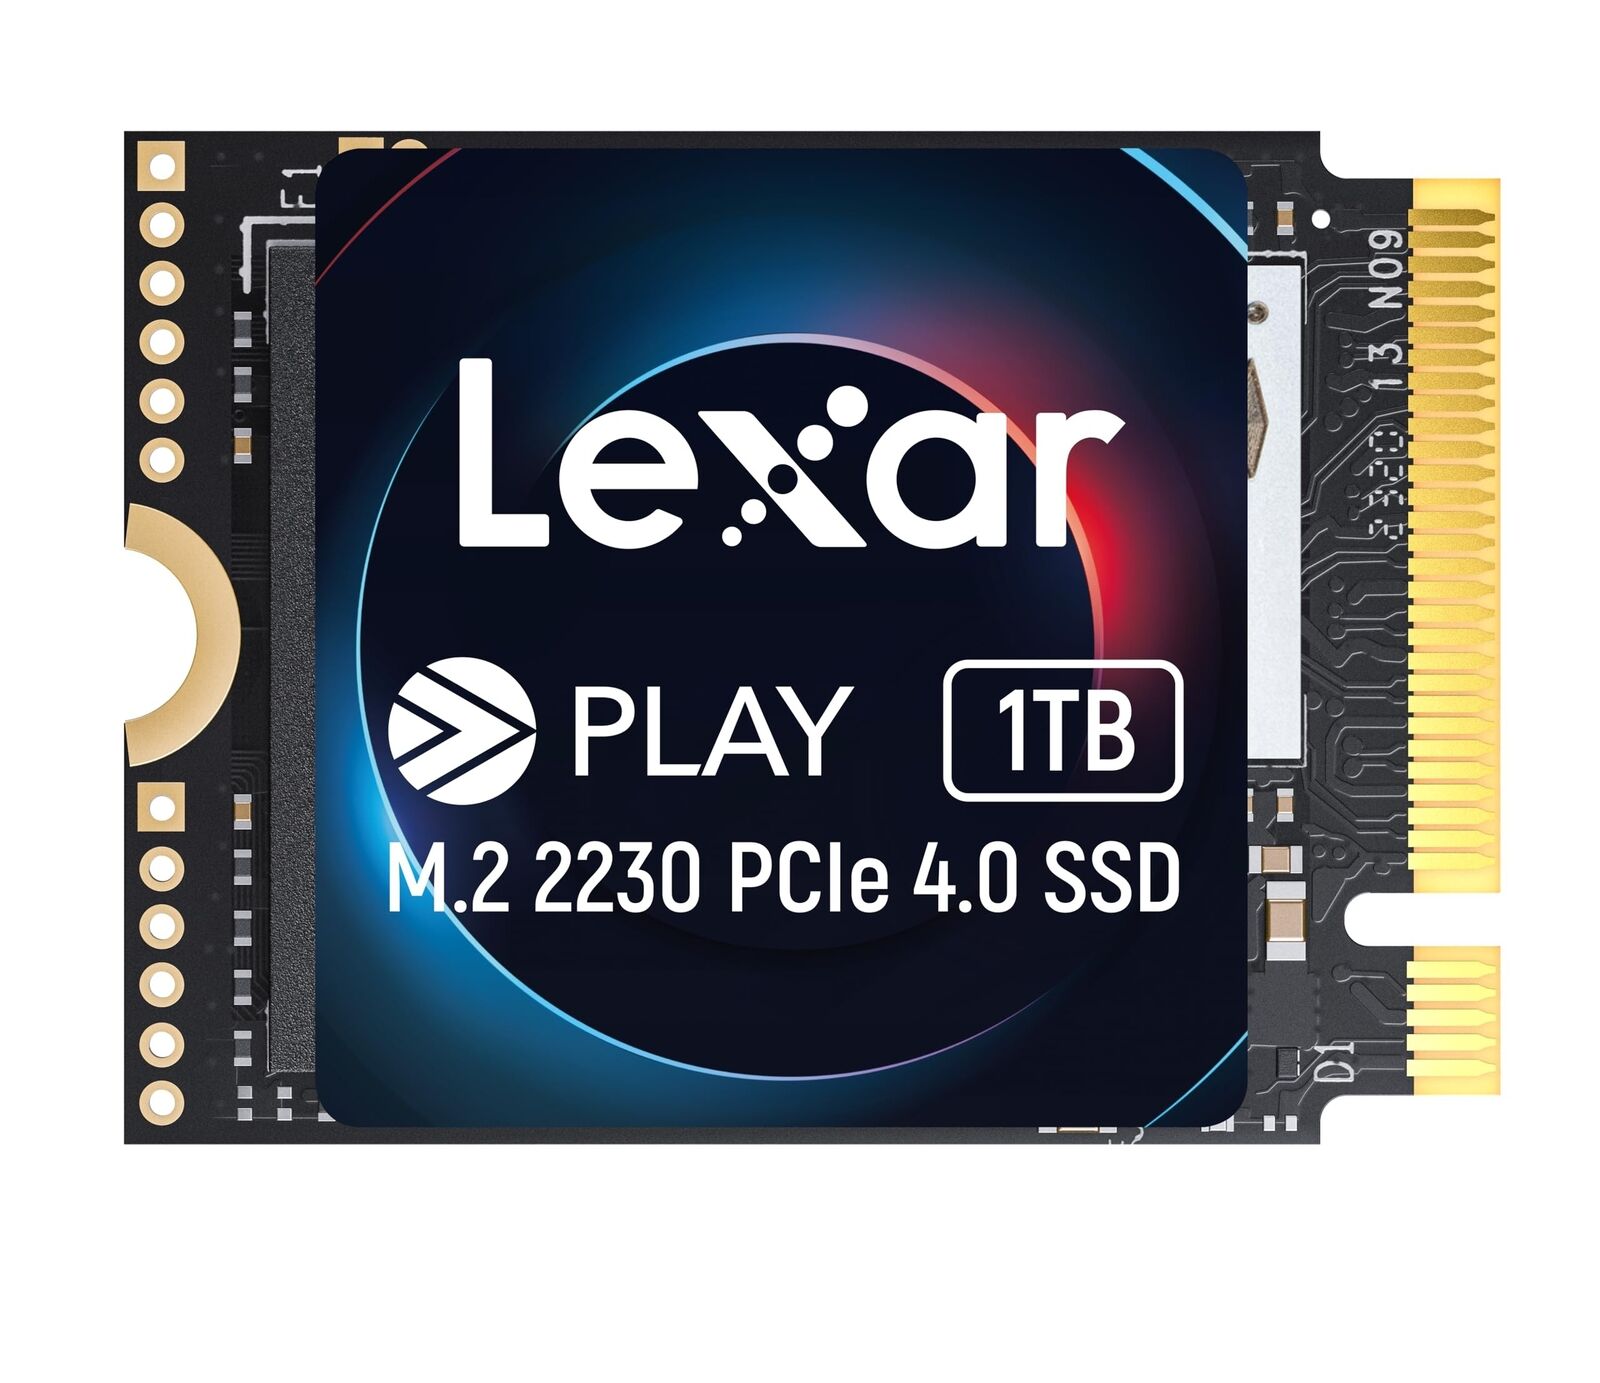 Lexar 1TB PLAY 2230 PCle Gen 4x4 NVMe, Perfect for Steam Deck, ASUS ROG Ally,...